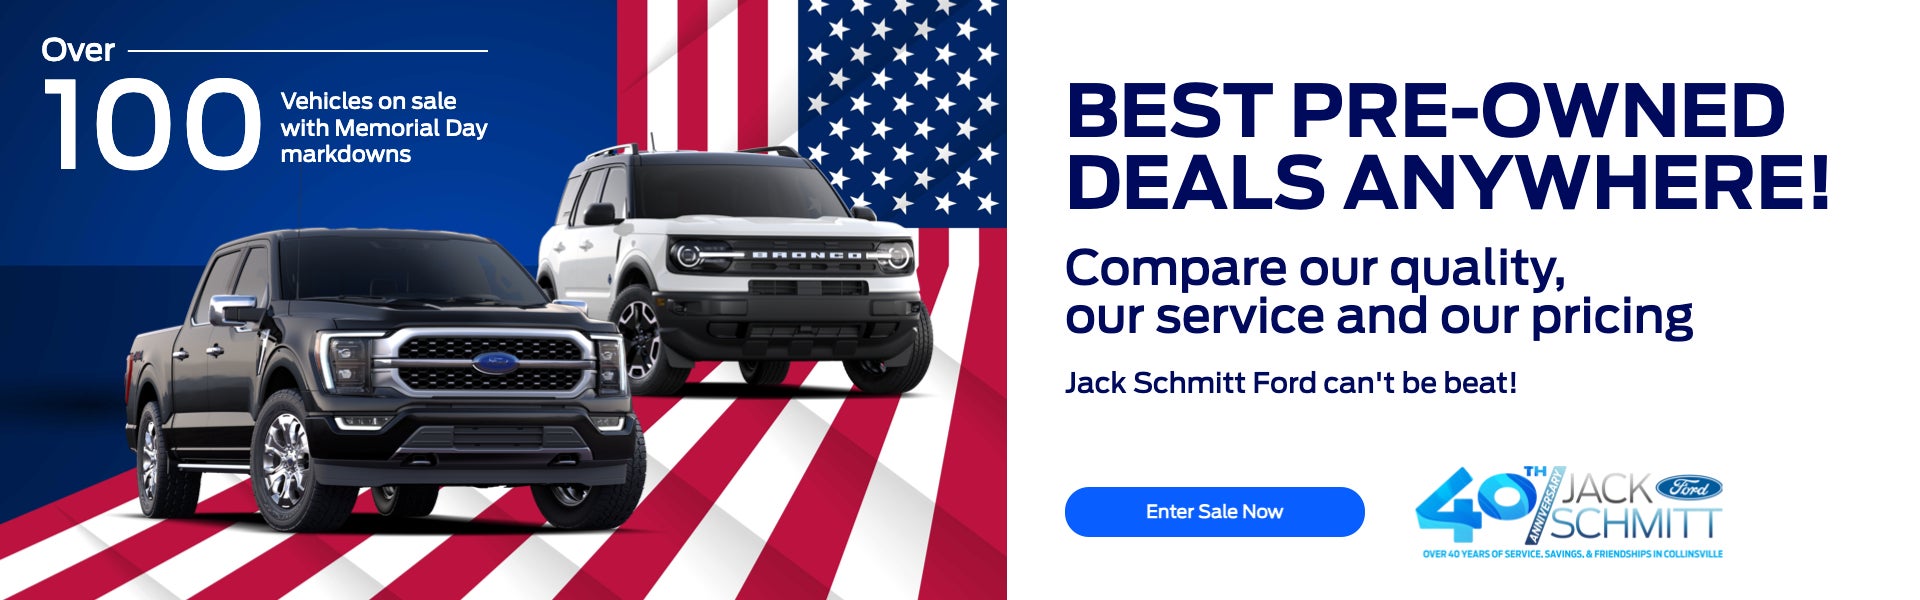 BEST PRE-OWNED DEALS ANYWHERE!